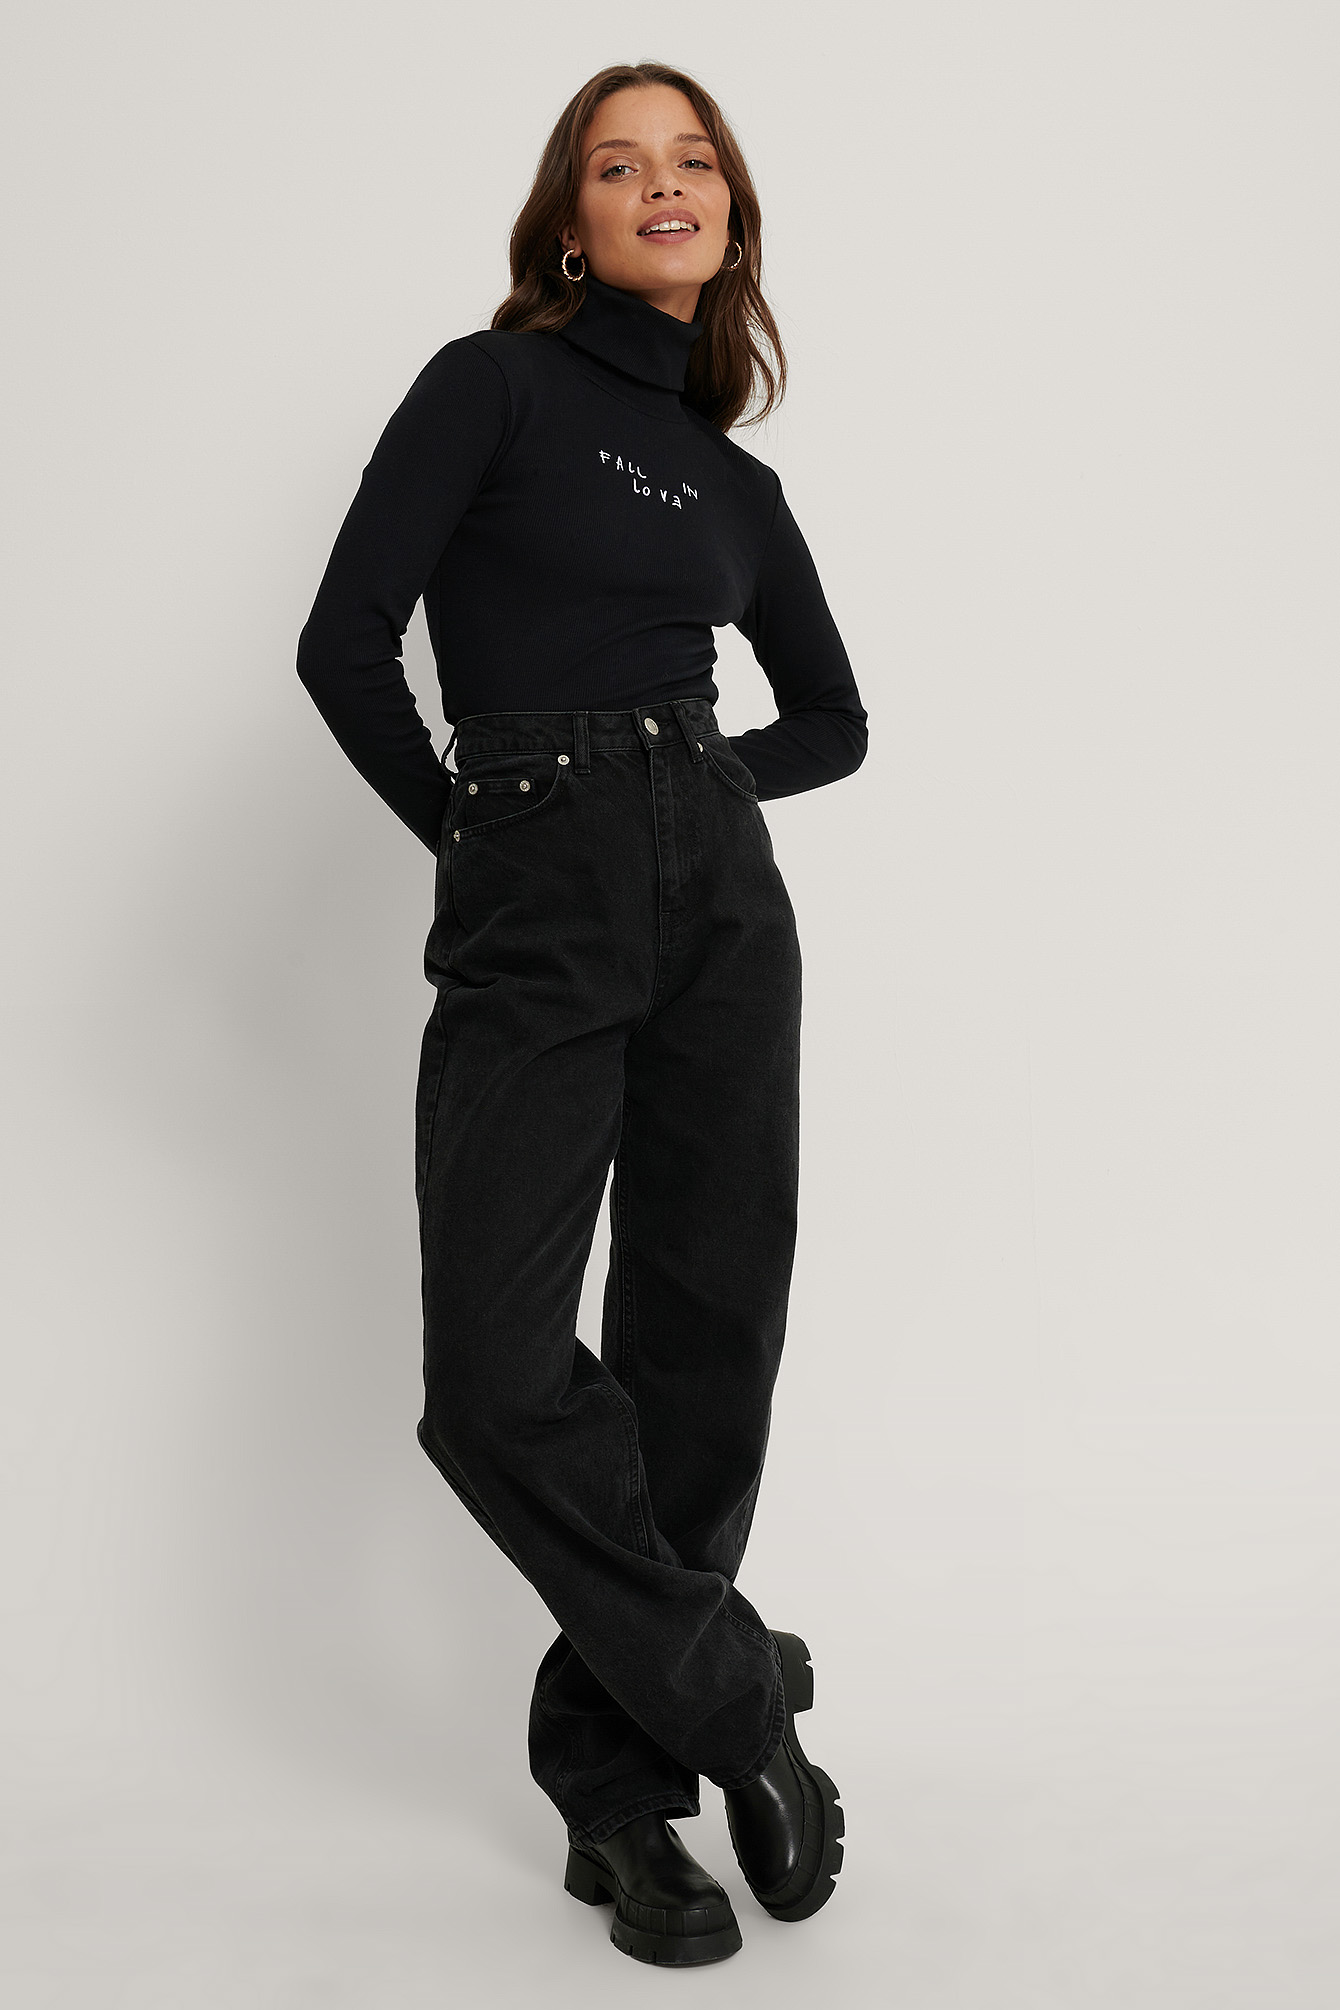 Organic Ribbed Embroidered Top with Black Jeans.